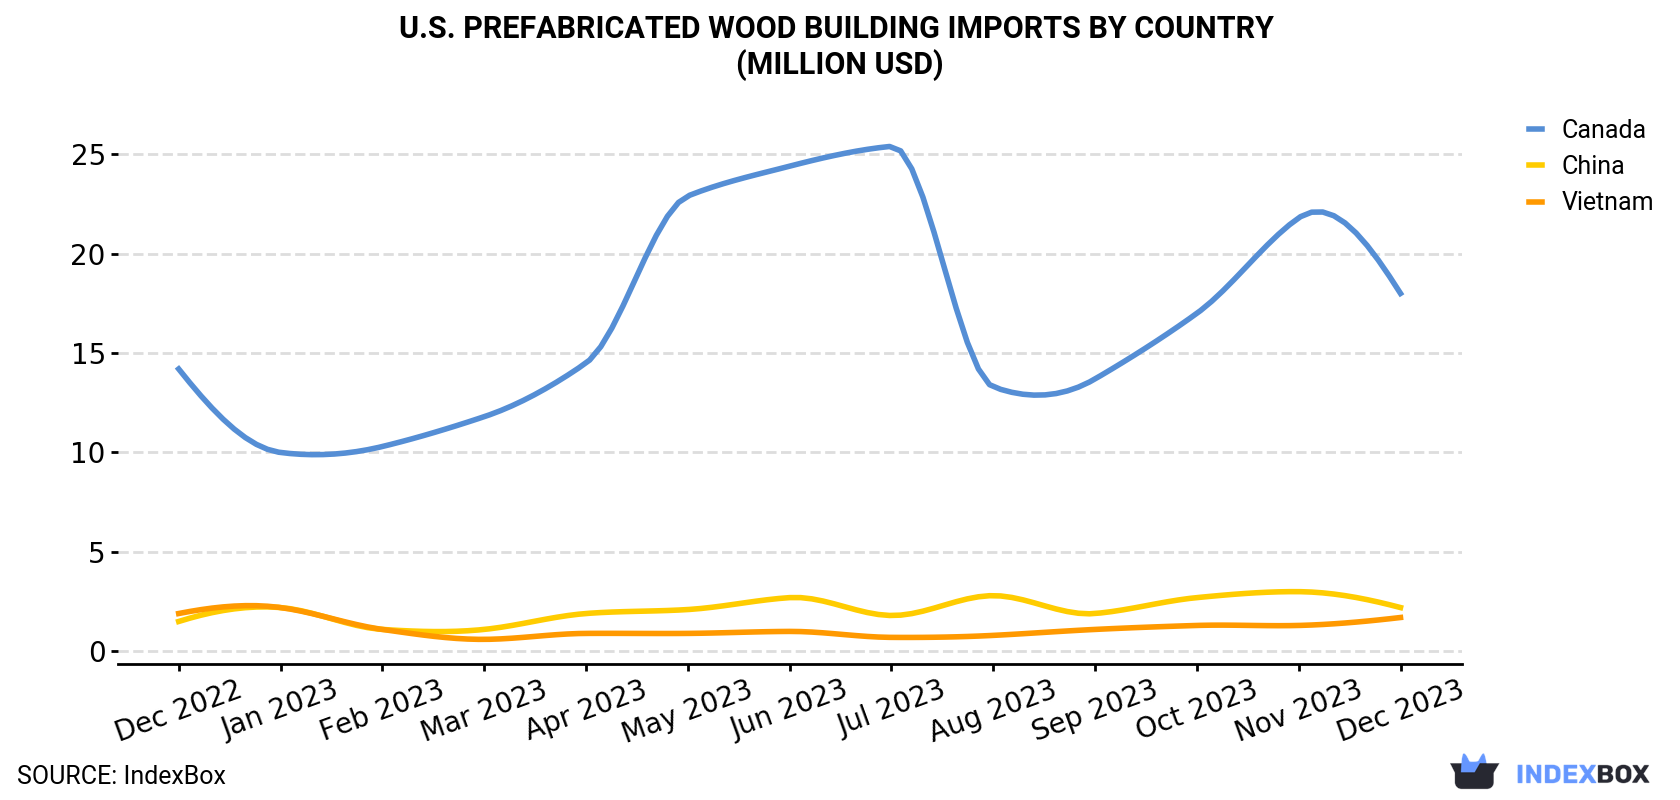 U.S. Prefabricated Wood Building Imports By Country (Million USD)